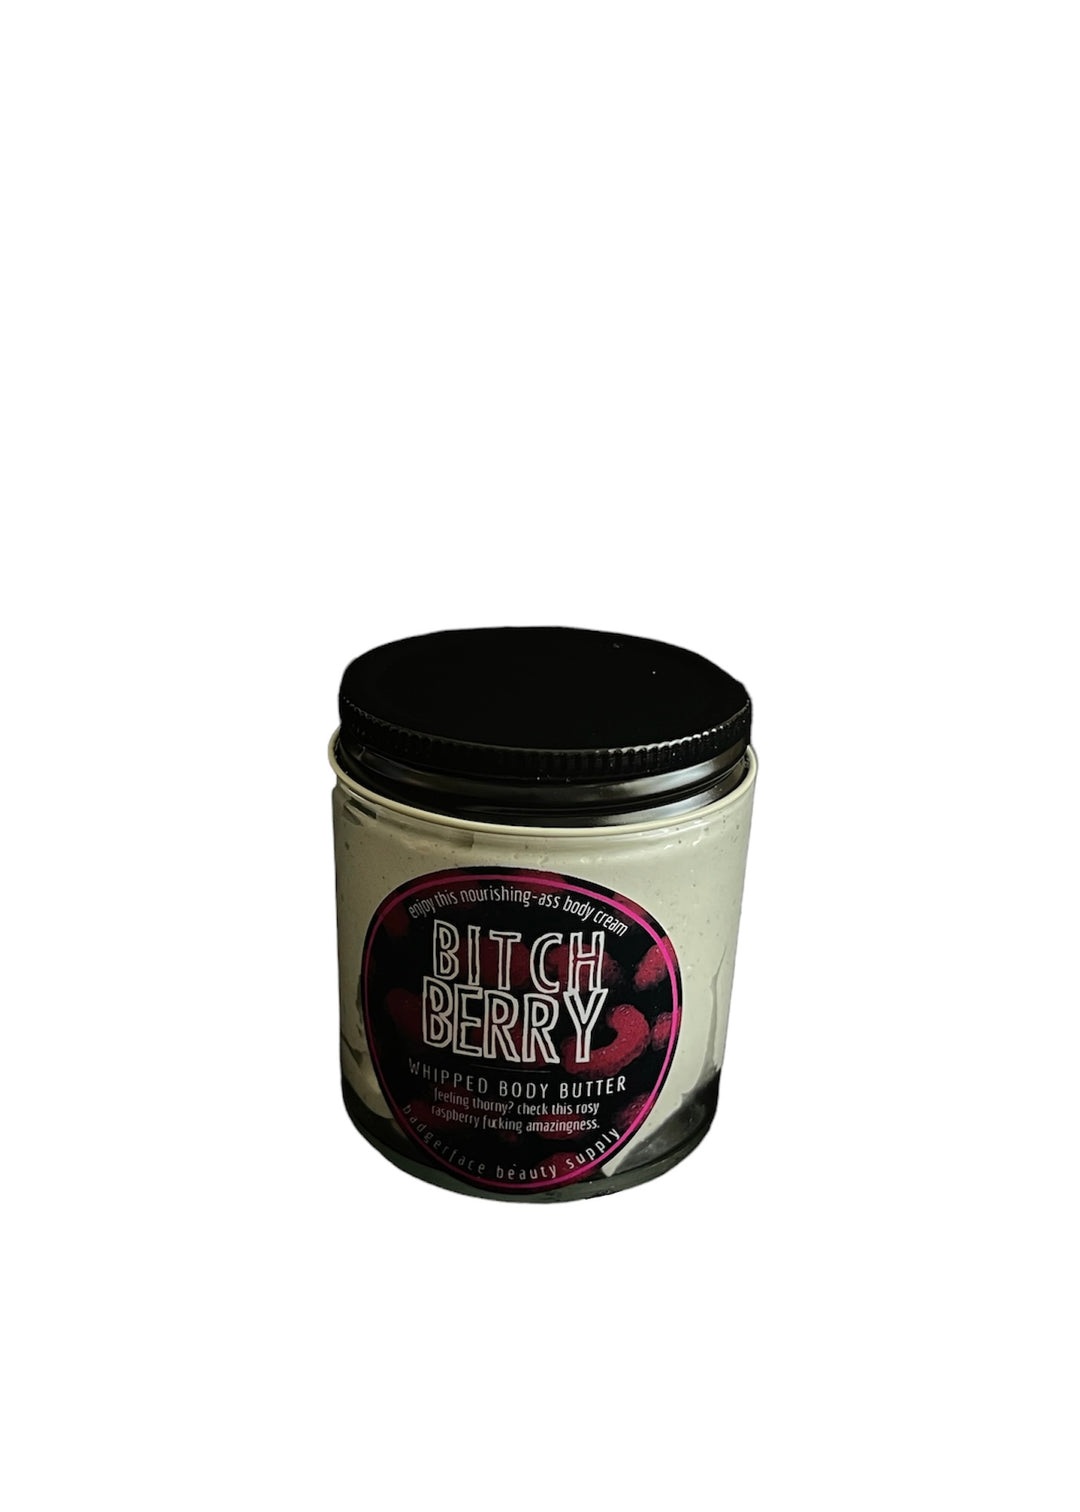 B***H BERRY WHIPPED BODY BUTTER